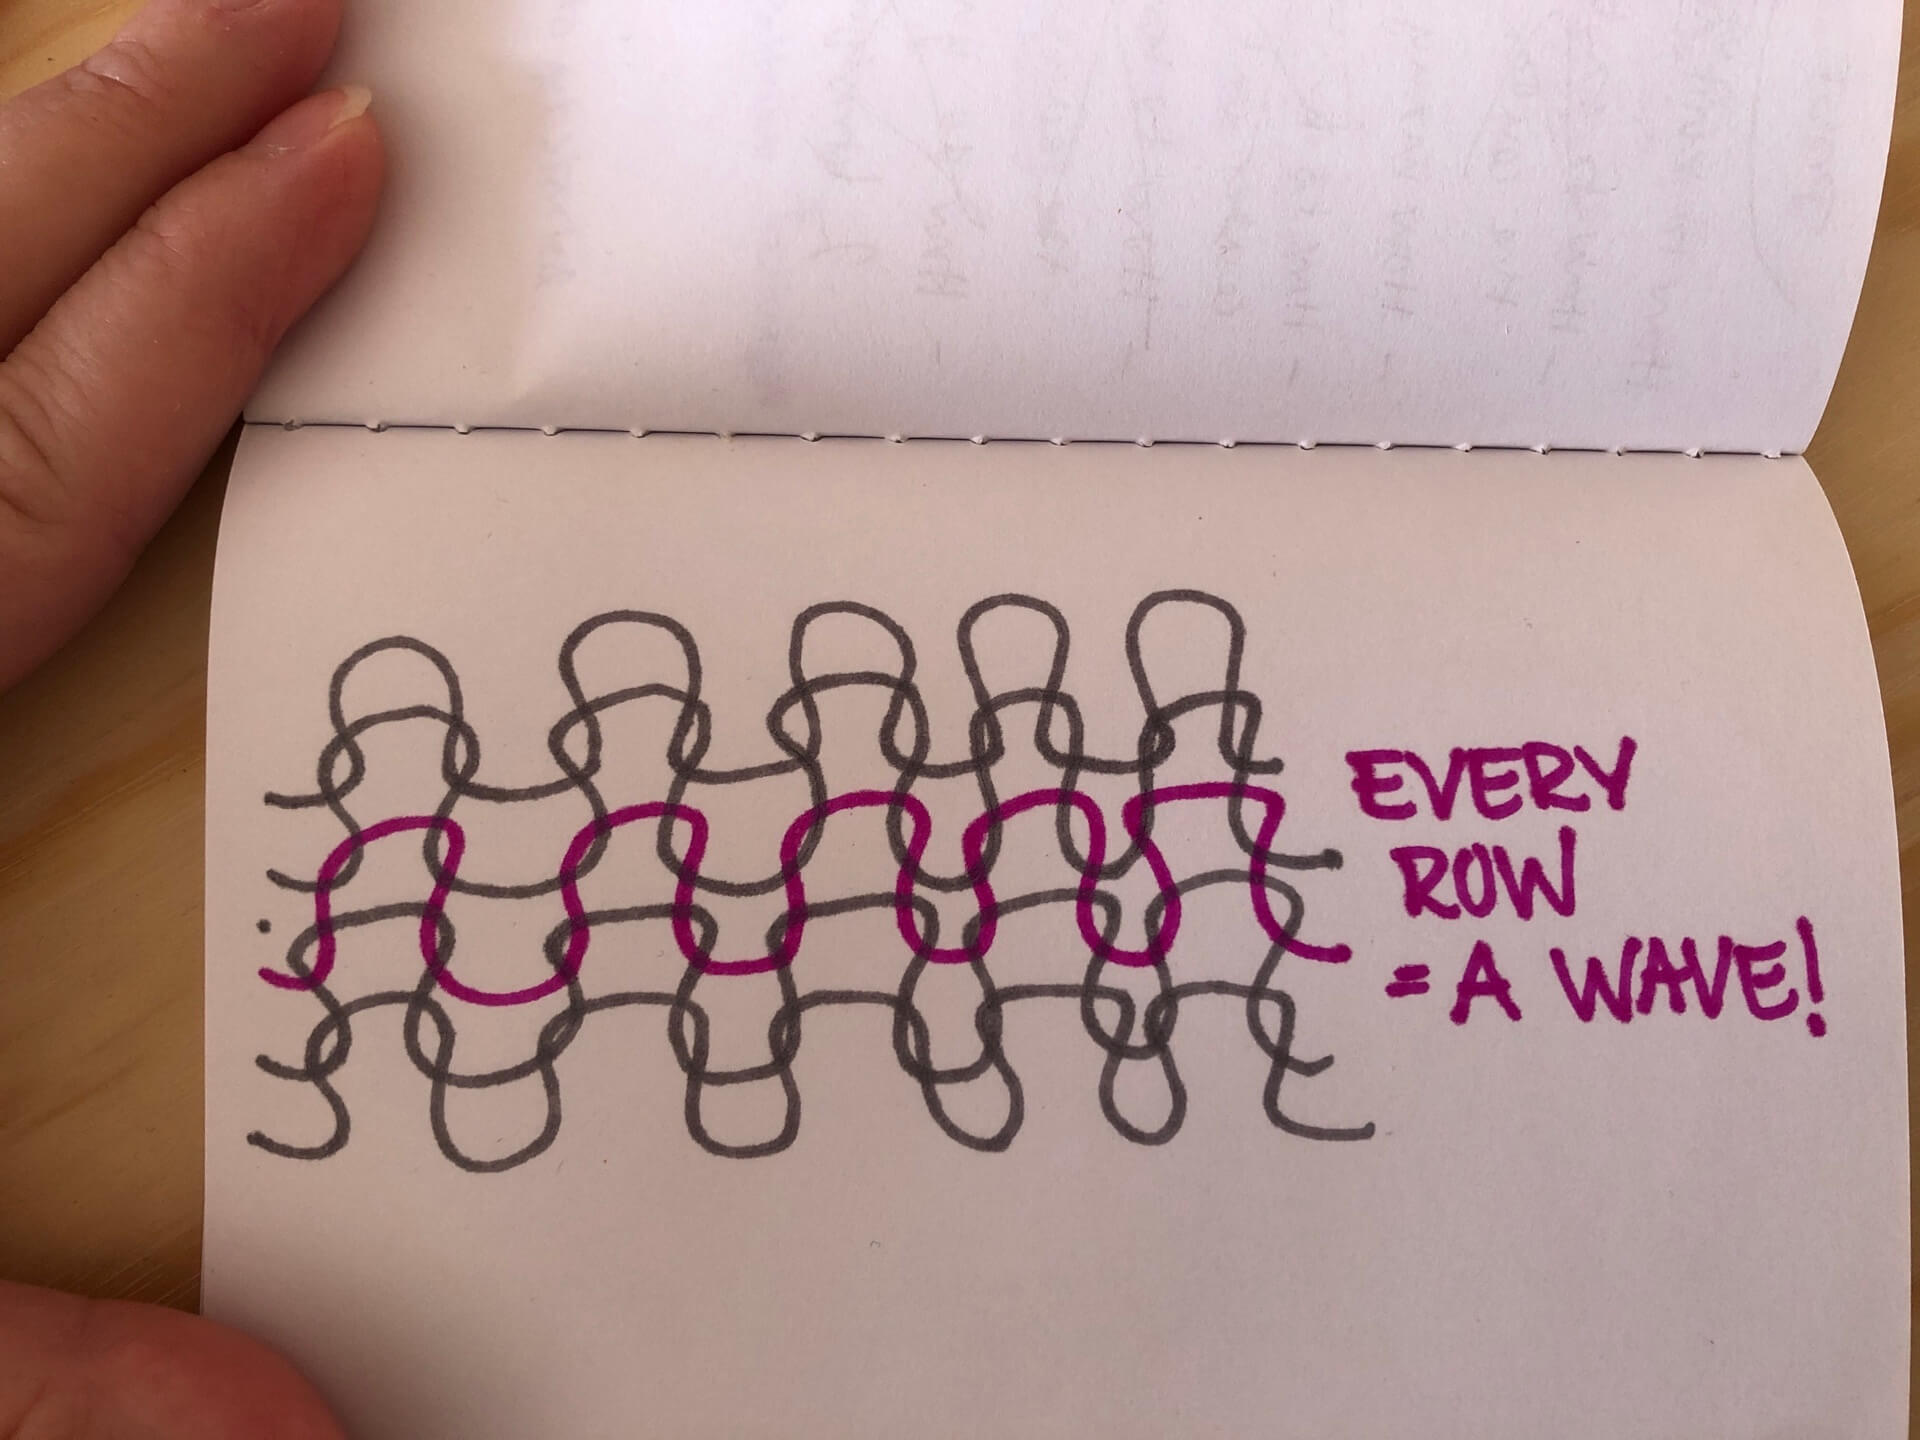 a drawing showing how every row of knitted fabric equals a wave. 